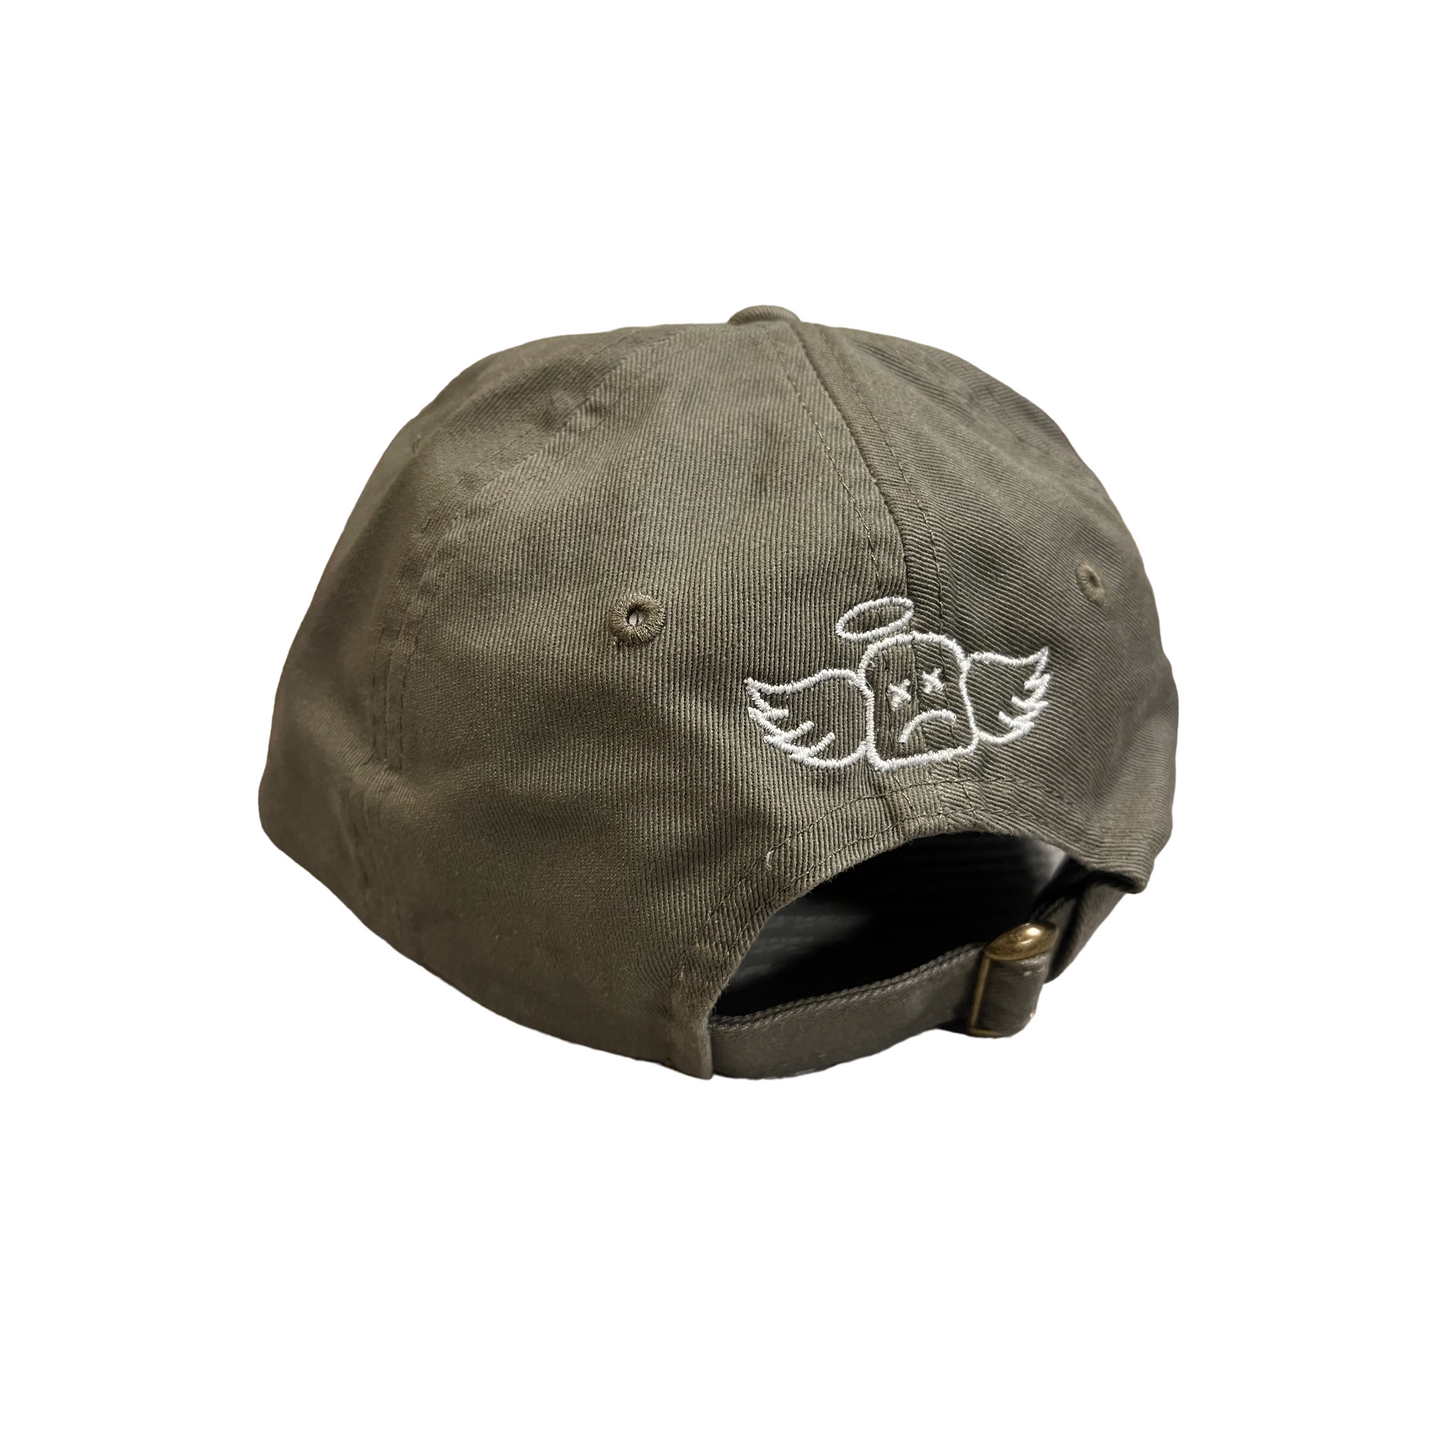 SLIGHTLY TOASTED DAD CAP - OLIVE GREEN